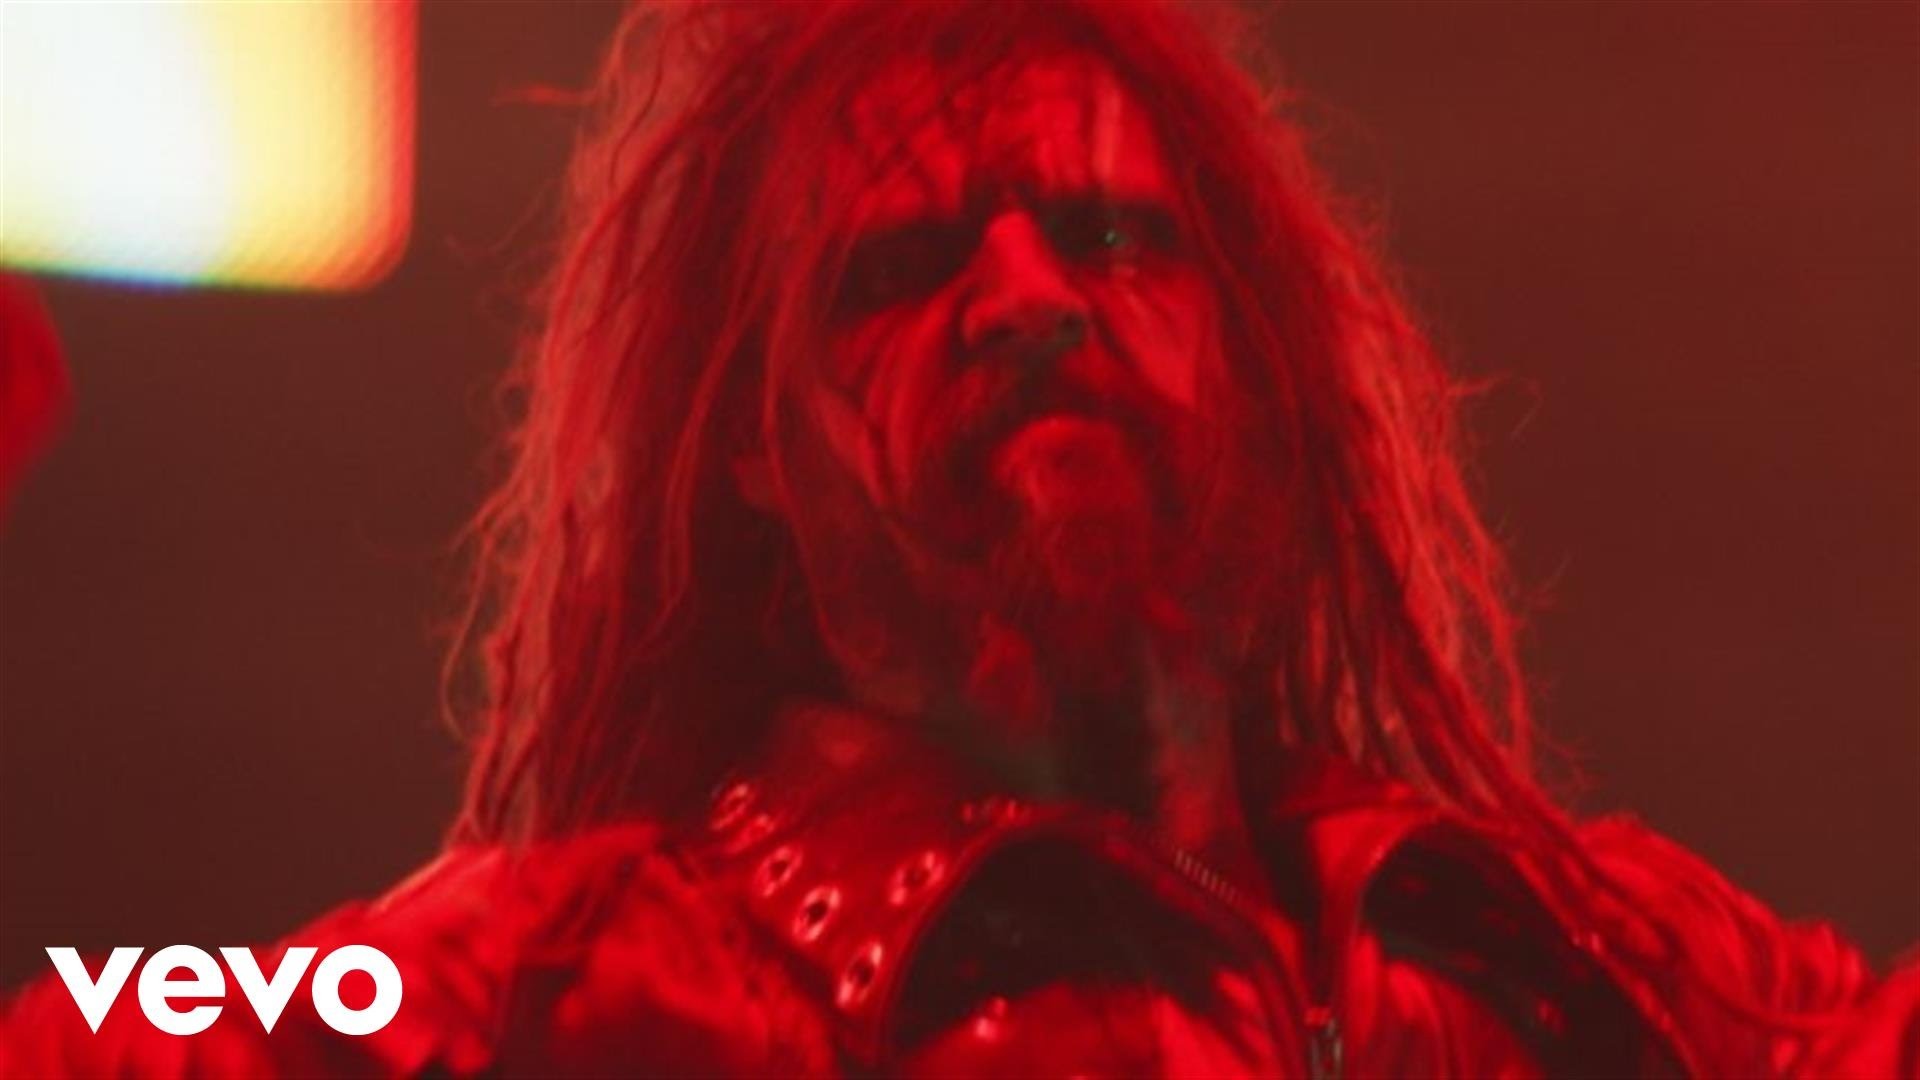 1920x1080 Rob Zombie - Superbeast (Live) - With Loop Control - YouTube for Musicians